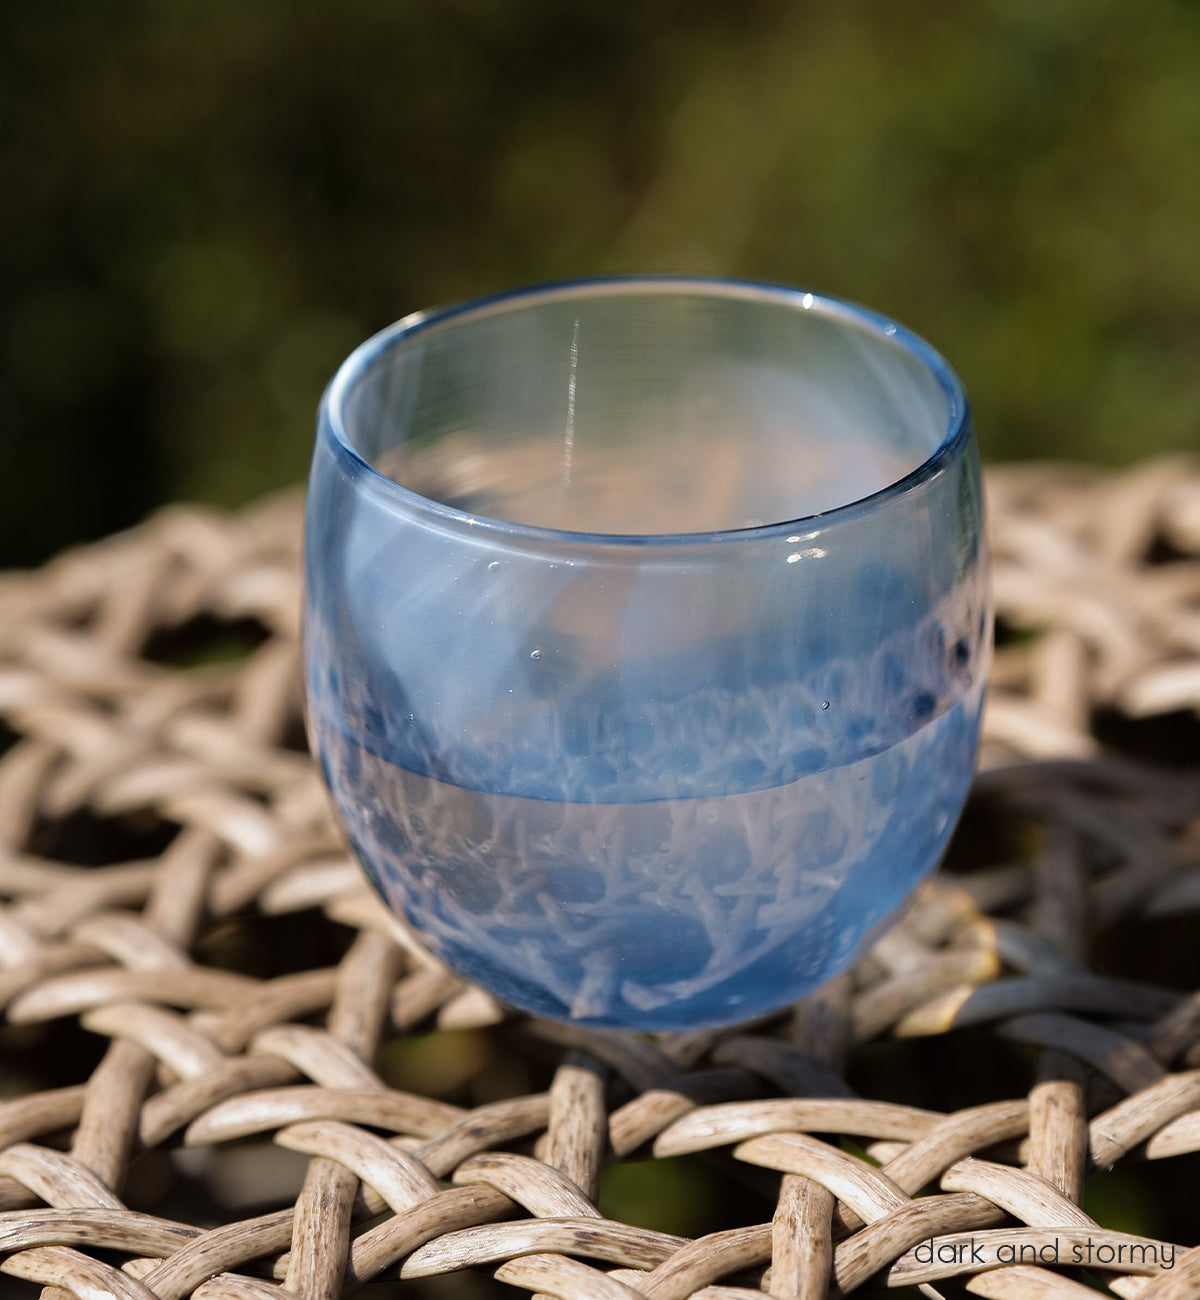 dark and stormy deep blue and white swirled together, to create this one-of-a-kind hand-blown drinking glass sitting on a wicker table.